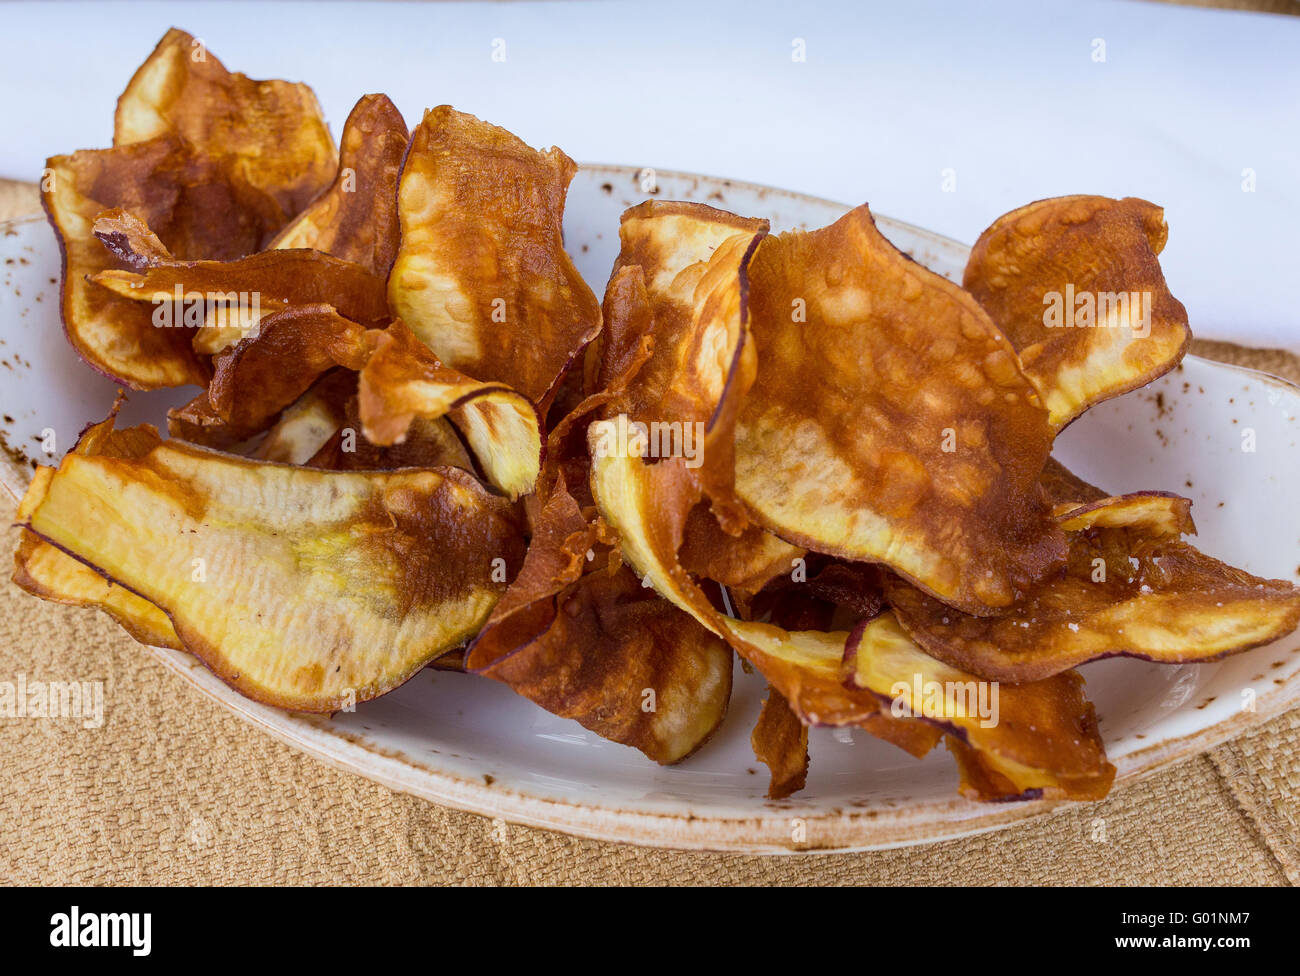 COSTA RICA -  Fried sweet potato chips on plate Stock Photo